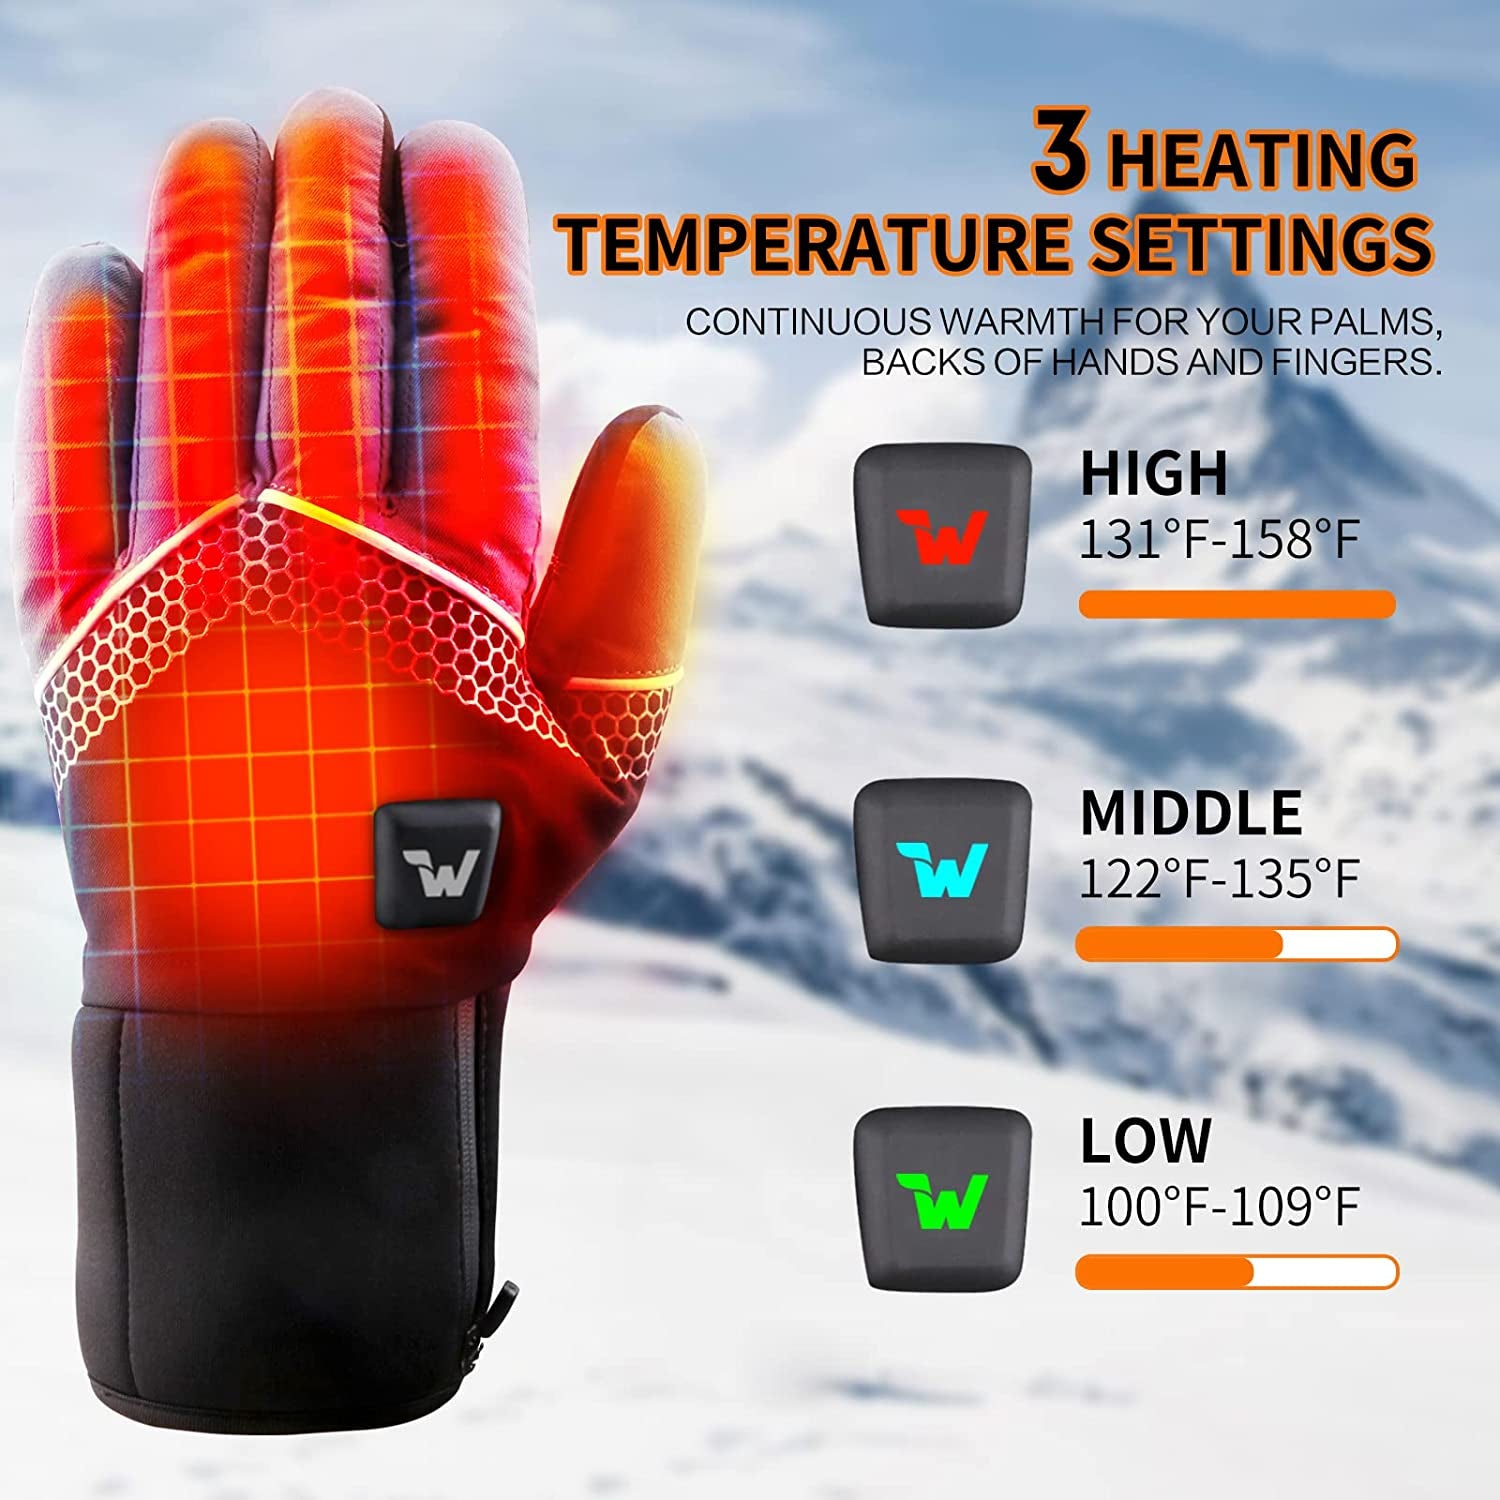 Electric Heated Gloves for Men Women with 3 Heating Levels Heated Gloves Touchscreen Waterproof Skiing Snowboarding Gloves